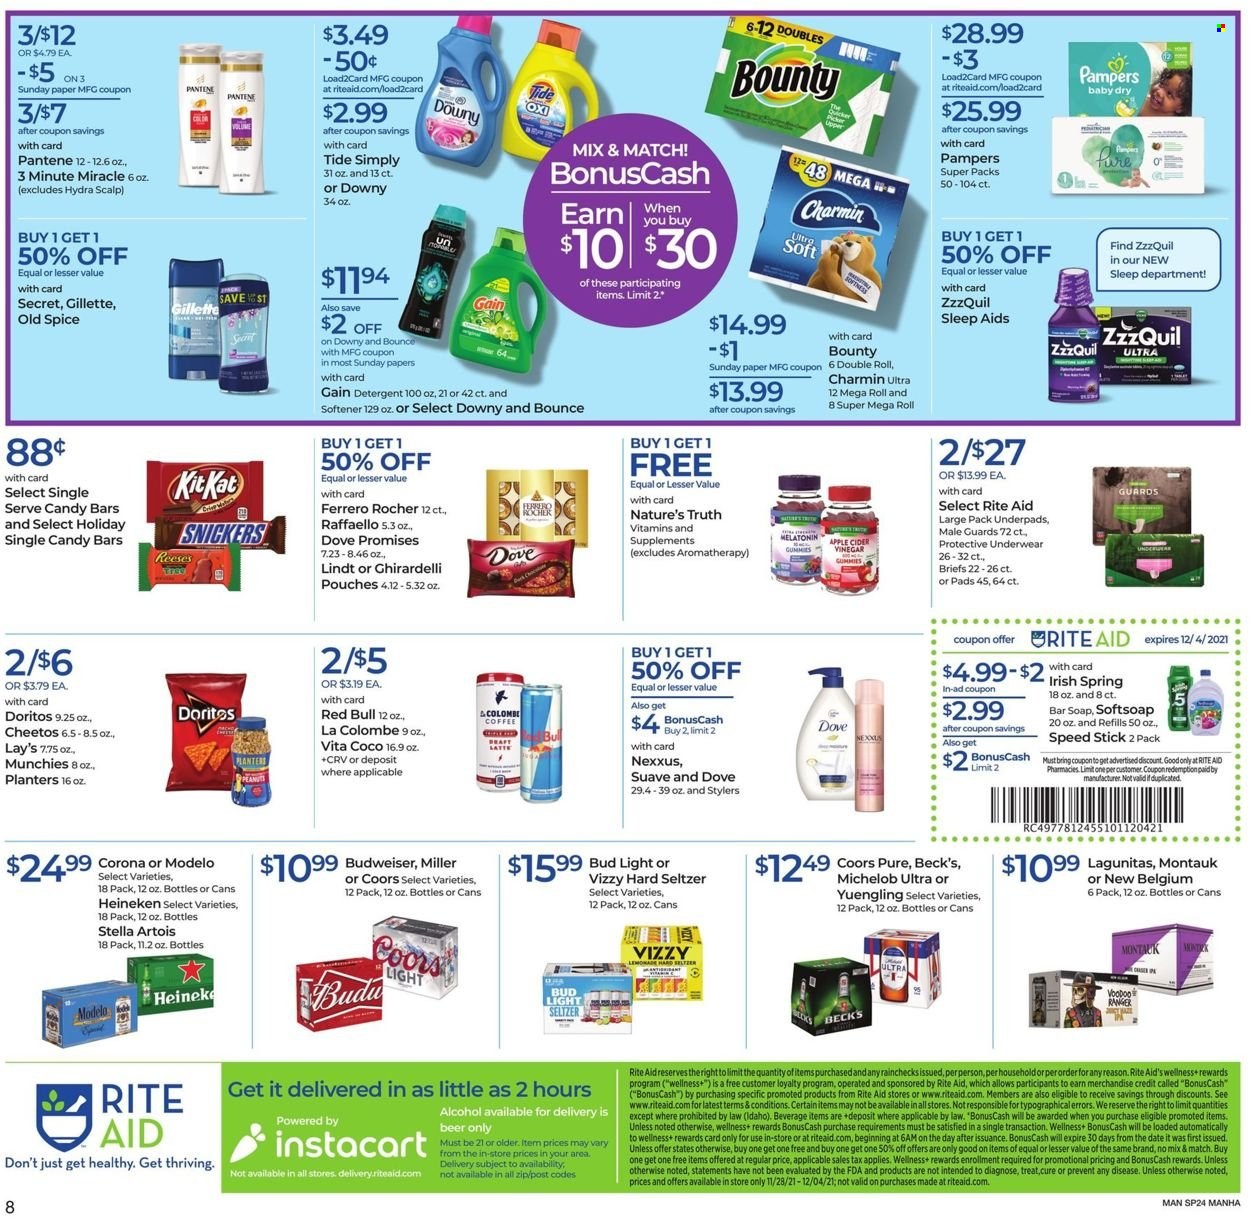 thumbnail - RITE AID Flyer - 11/28/2021 - 12/04/2021 - Sales products - Reese's, Lindt, Ferrero Rocher, Snickers, Bounty, Raffaello, Ghirardelli, Doritos, Cheetos, Lay’s, spice, Planters, Red Bull, coffee, alcohol, Hard Seltzer, beer, Bud Light, Corona Extra, Heineken, Miller, Beck's, Modelo, Pampers, Dove, Charmin, detergent, Gain, Tide, fabric softener, Bounce, Softsoap, Suave, Old Spice, soap bar, soap, Pantene, Nexxus, Brite, Speed Stick, Gillette, Nature's Truth, ZzzQuil, Budweiser, Stella Artois, Coors, Yuengling, Michelob. Page 5.